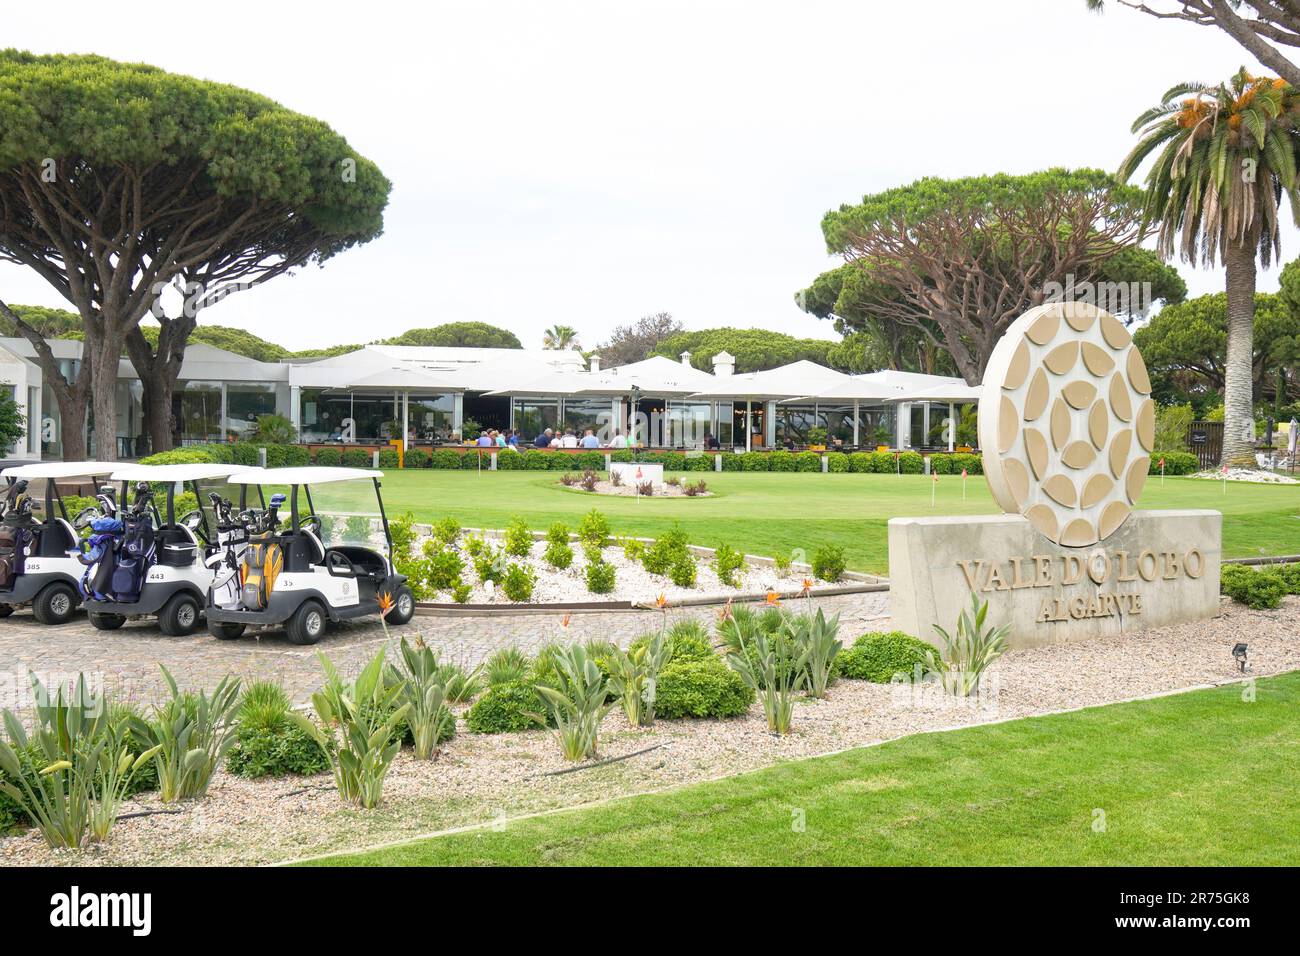 Welcome sign at Vale do Lobo golf club and course, with golf buggies and golf clubs, and a view to the club house and restaurant, algarve, portugal. Stock Photo